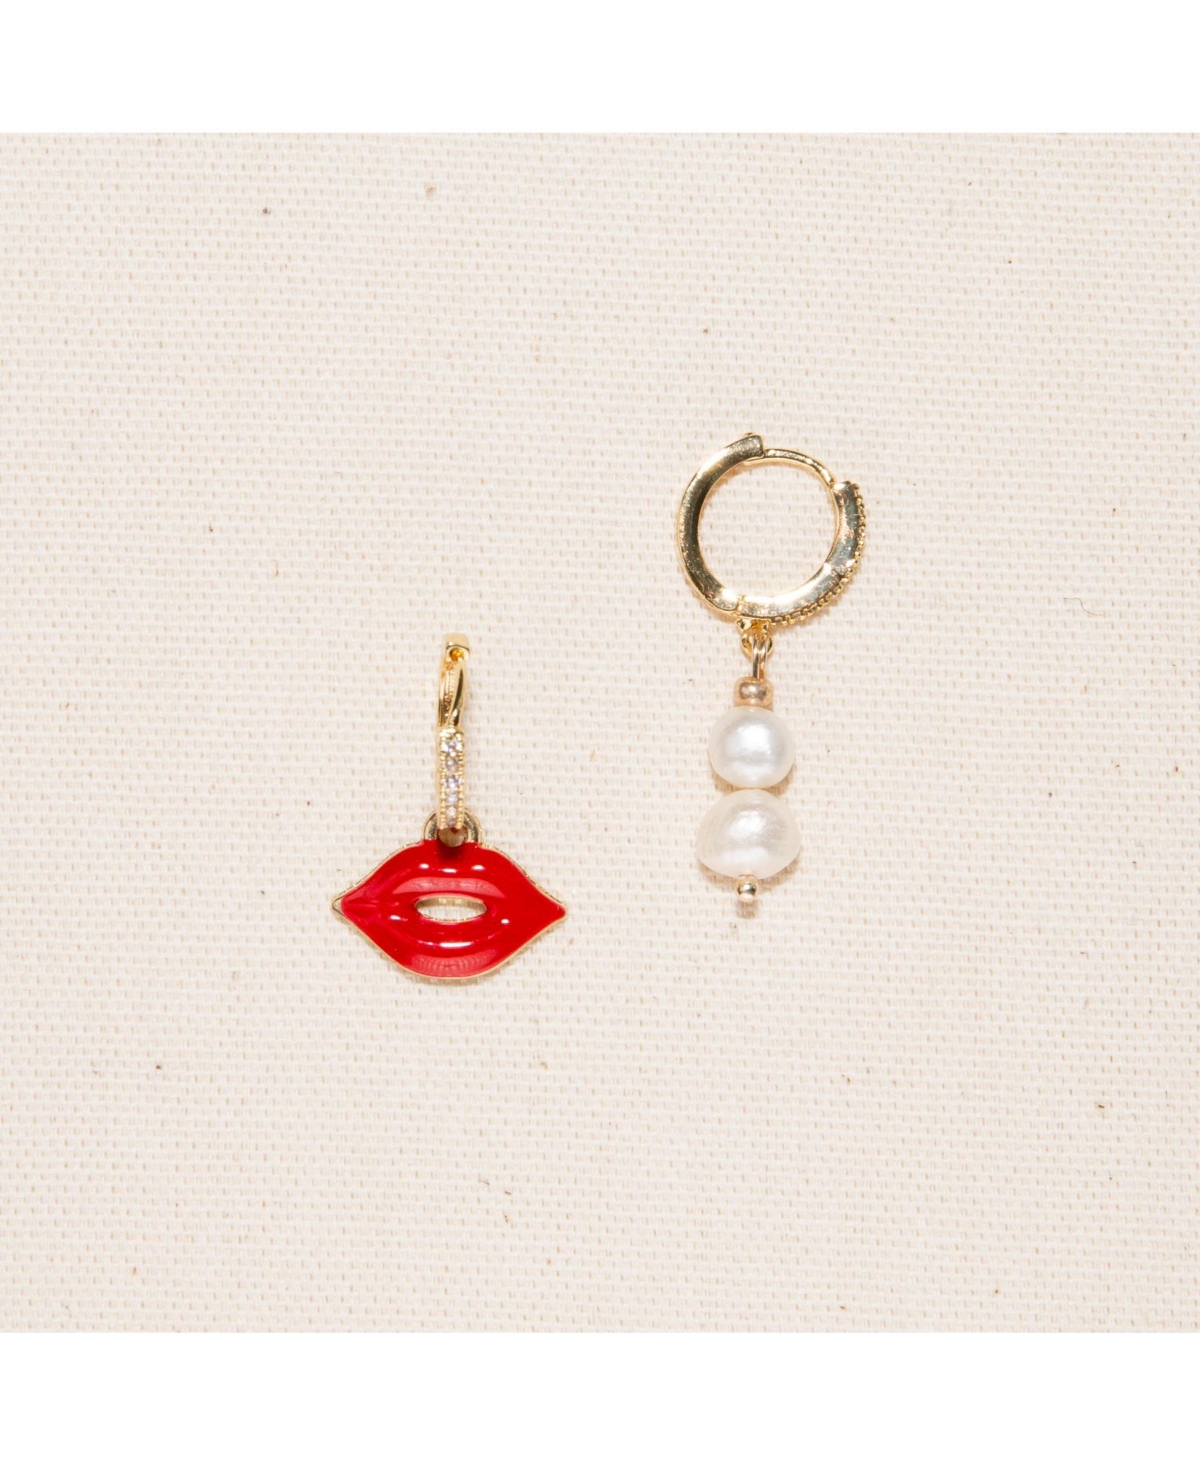 18k Gold Plated Huggies Freshwater Pearls with a Red Enamel Lip Charm - Lip Lip Earrings For Women - Red